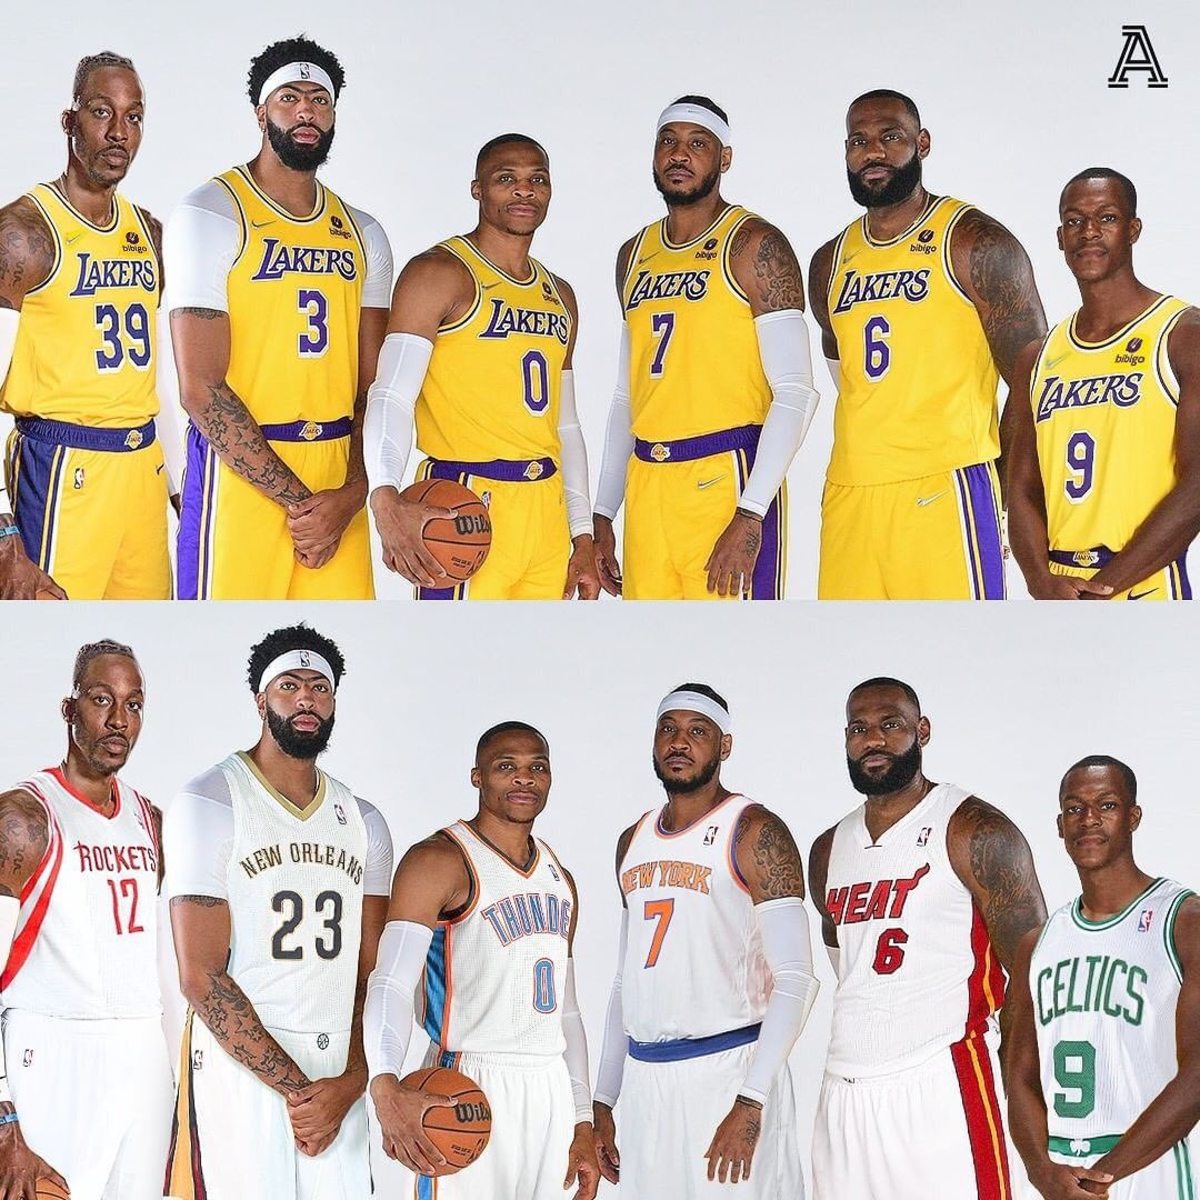 How The 2021 Lakers Looked In 2013 LeBron On The Heat, AD On The